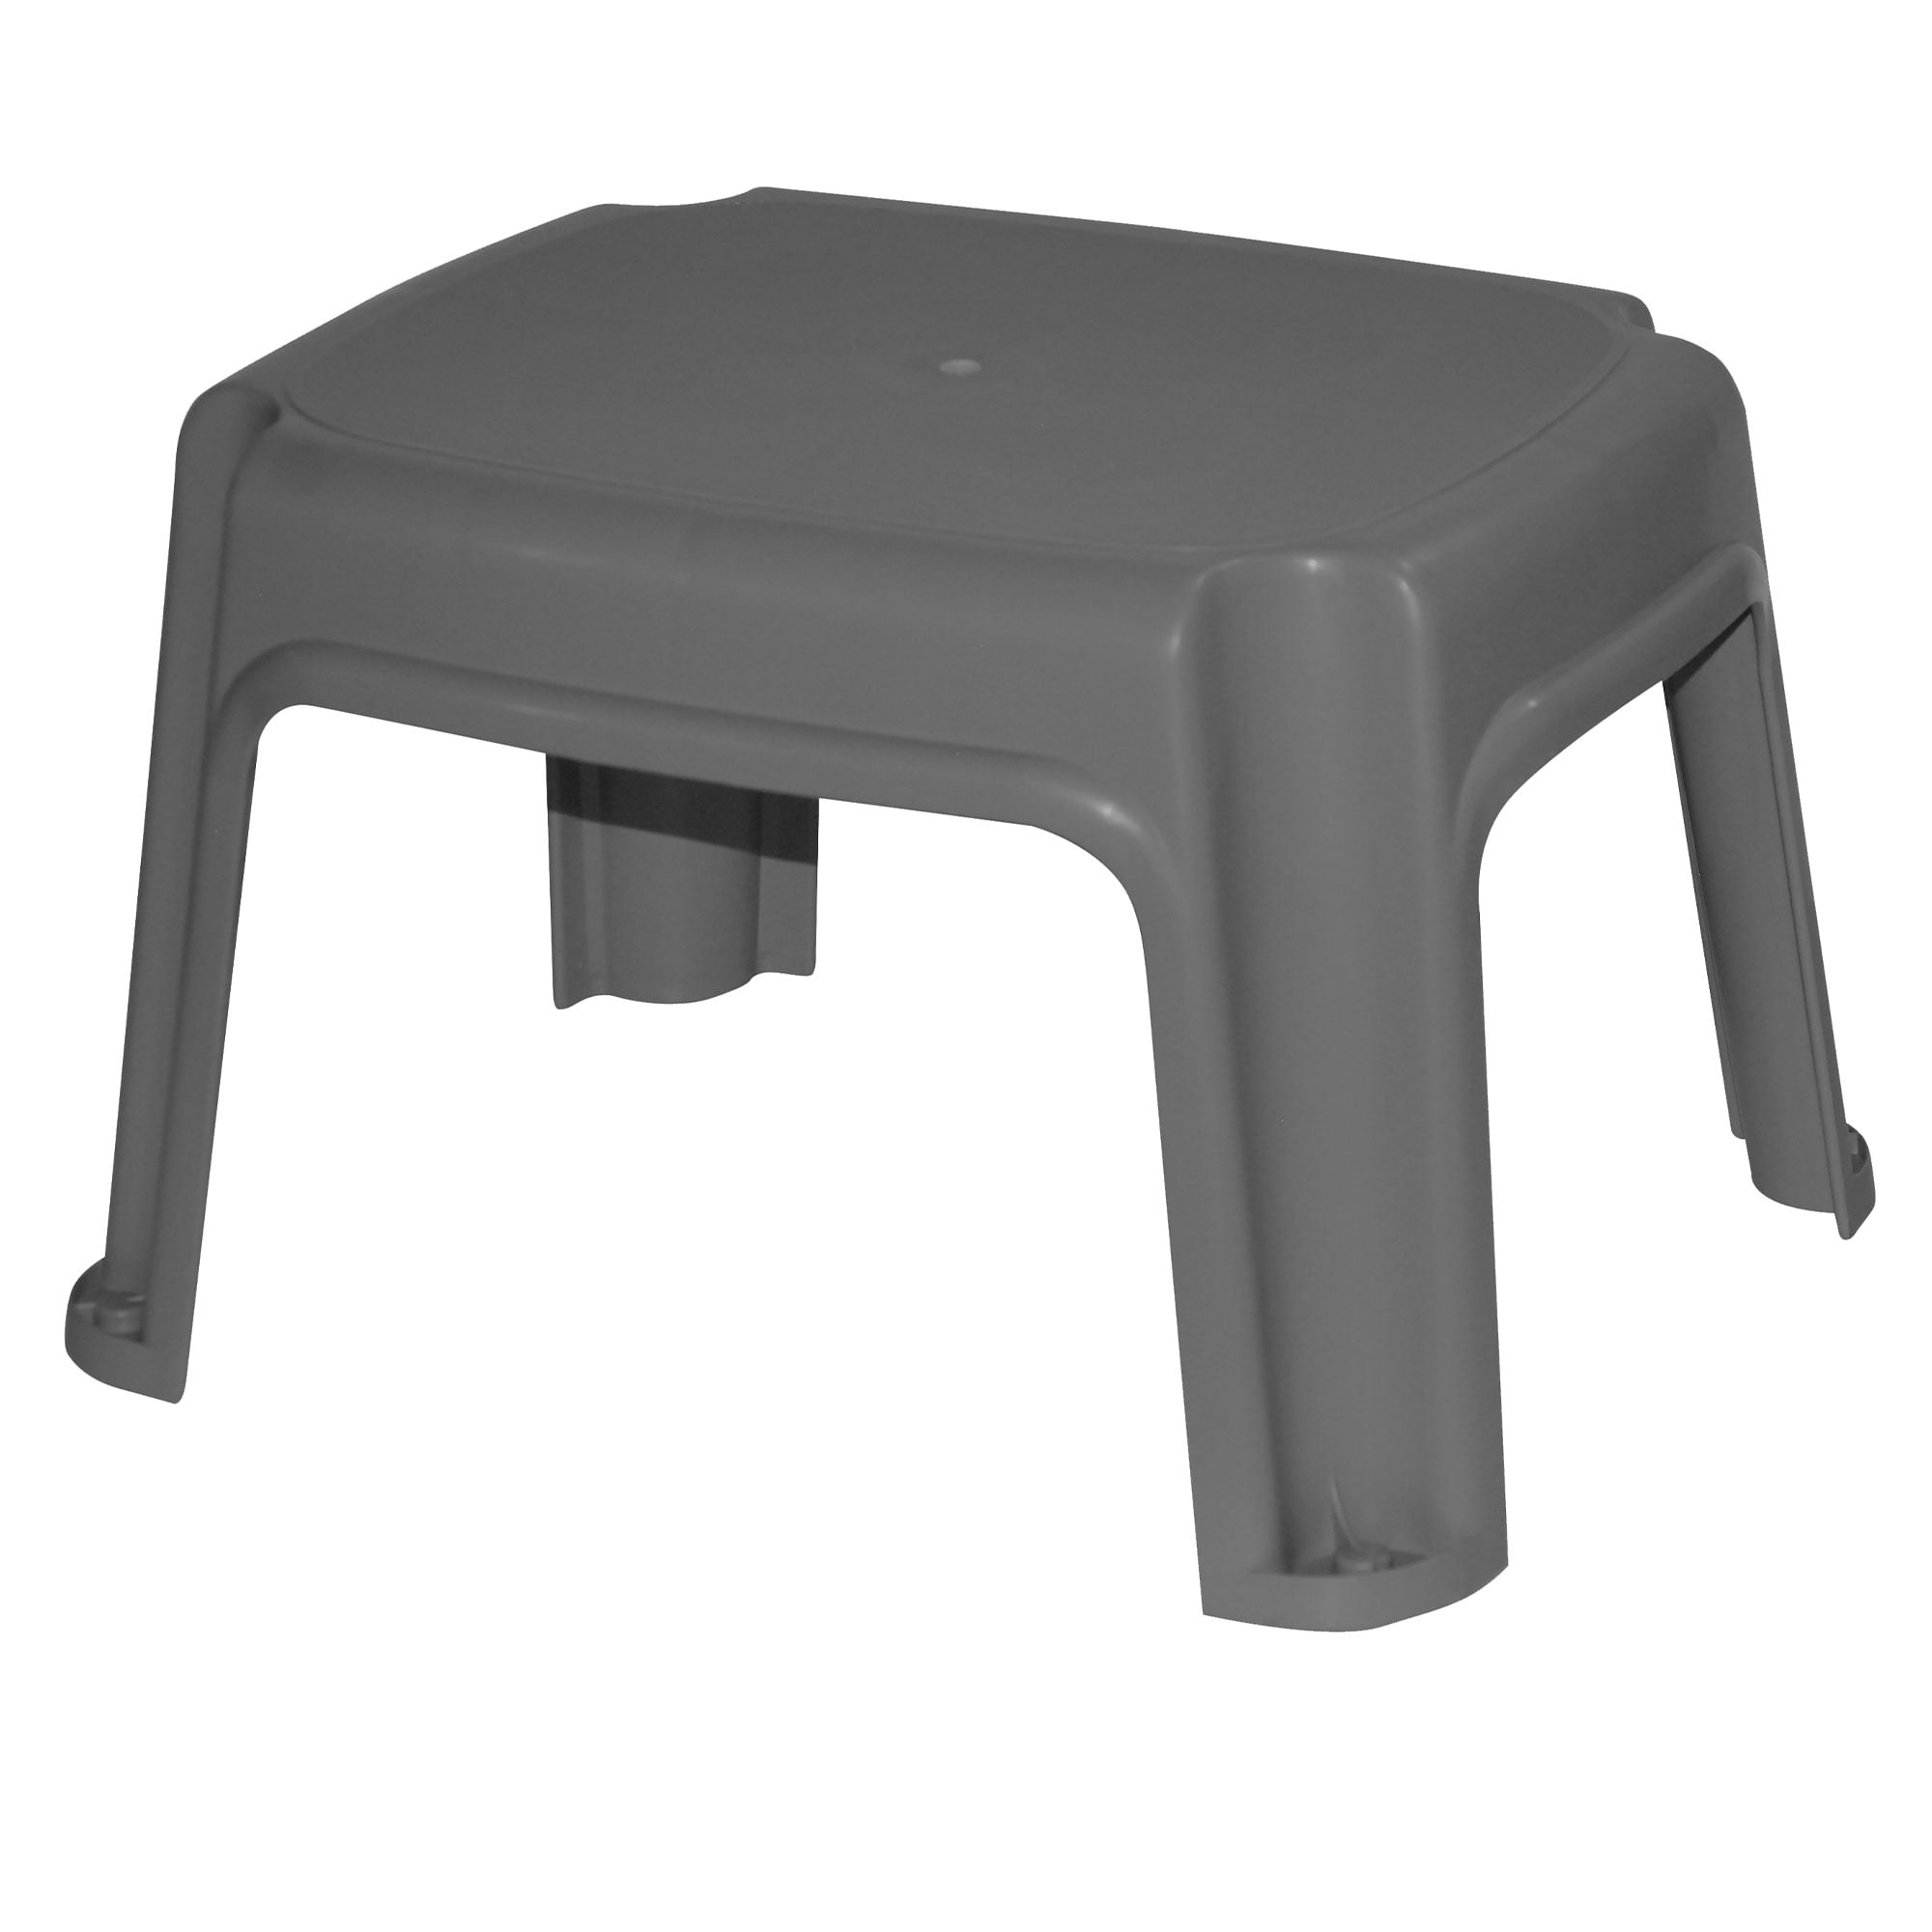 White Rubbermaid Durable Plastic Step Stool w/ 300-LB Weight Capacity 4-Pack